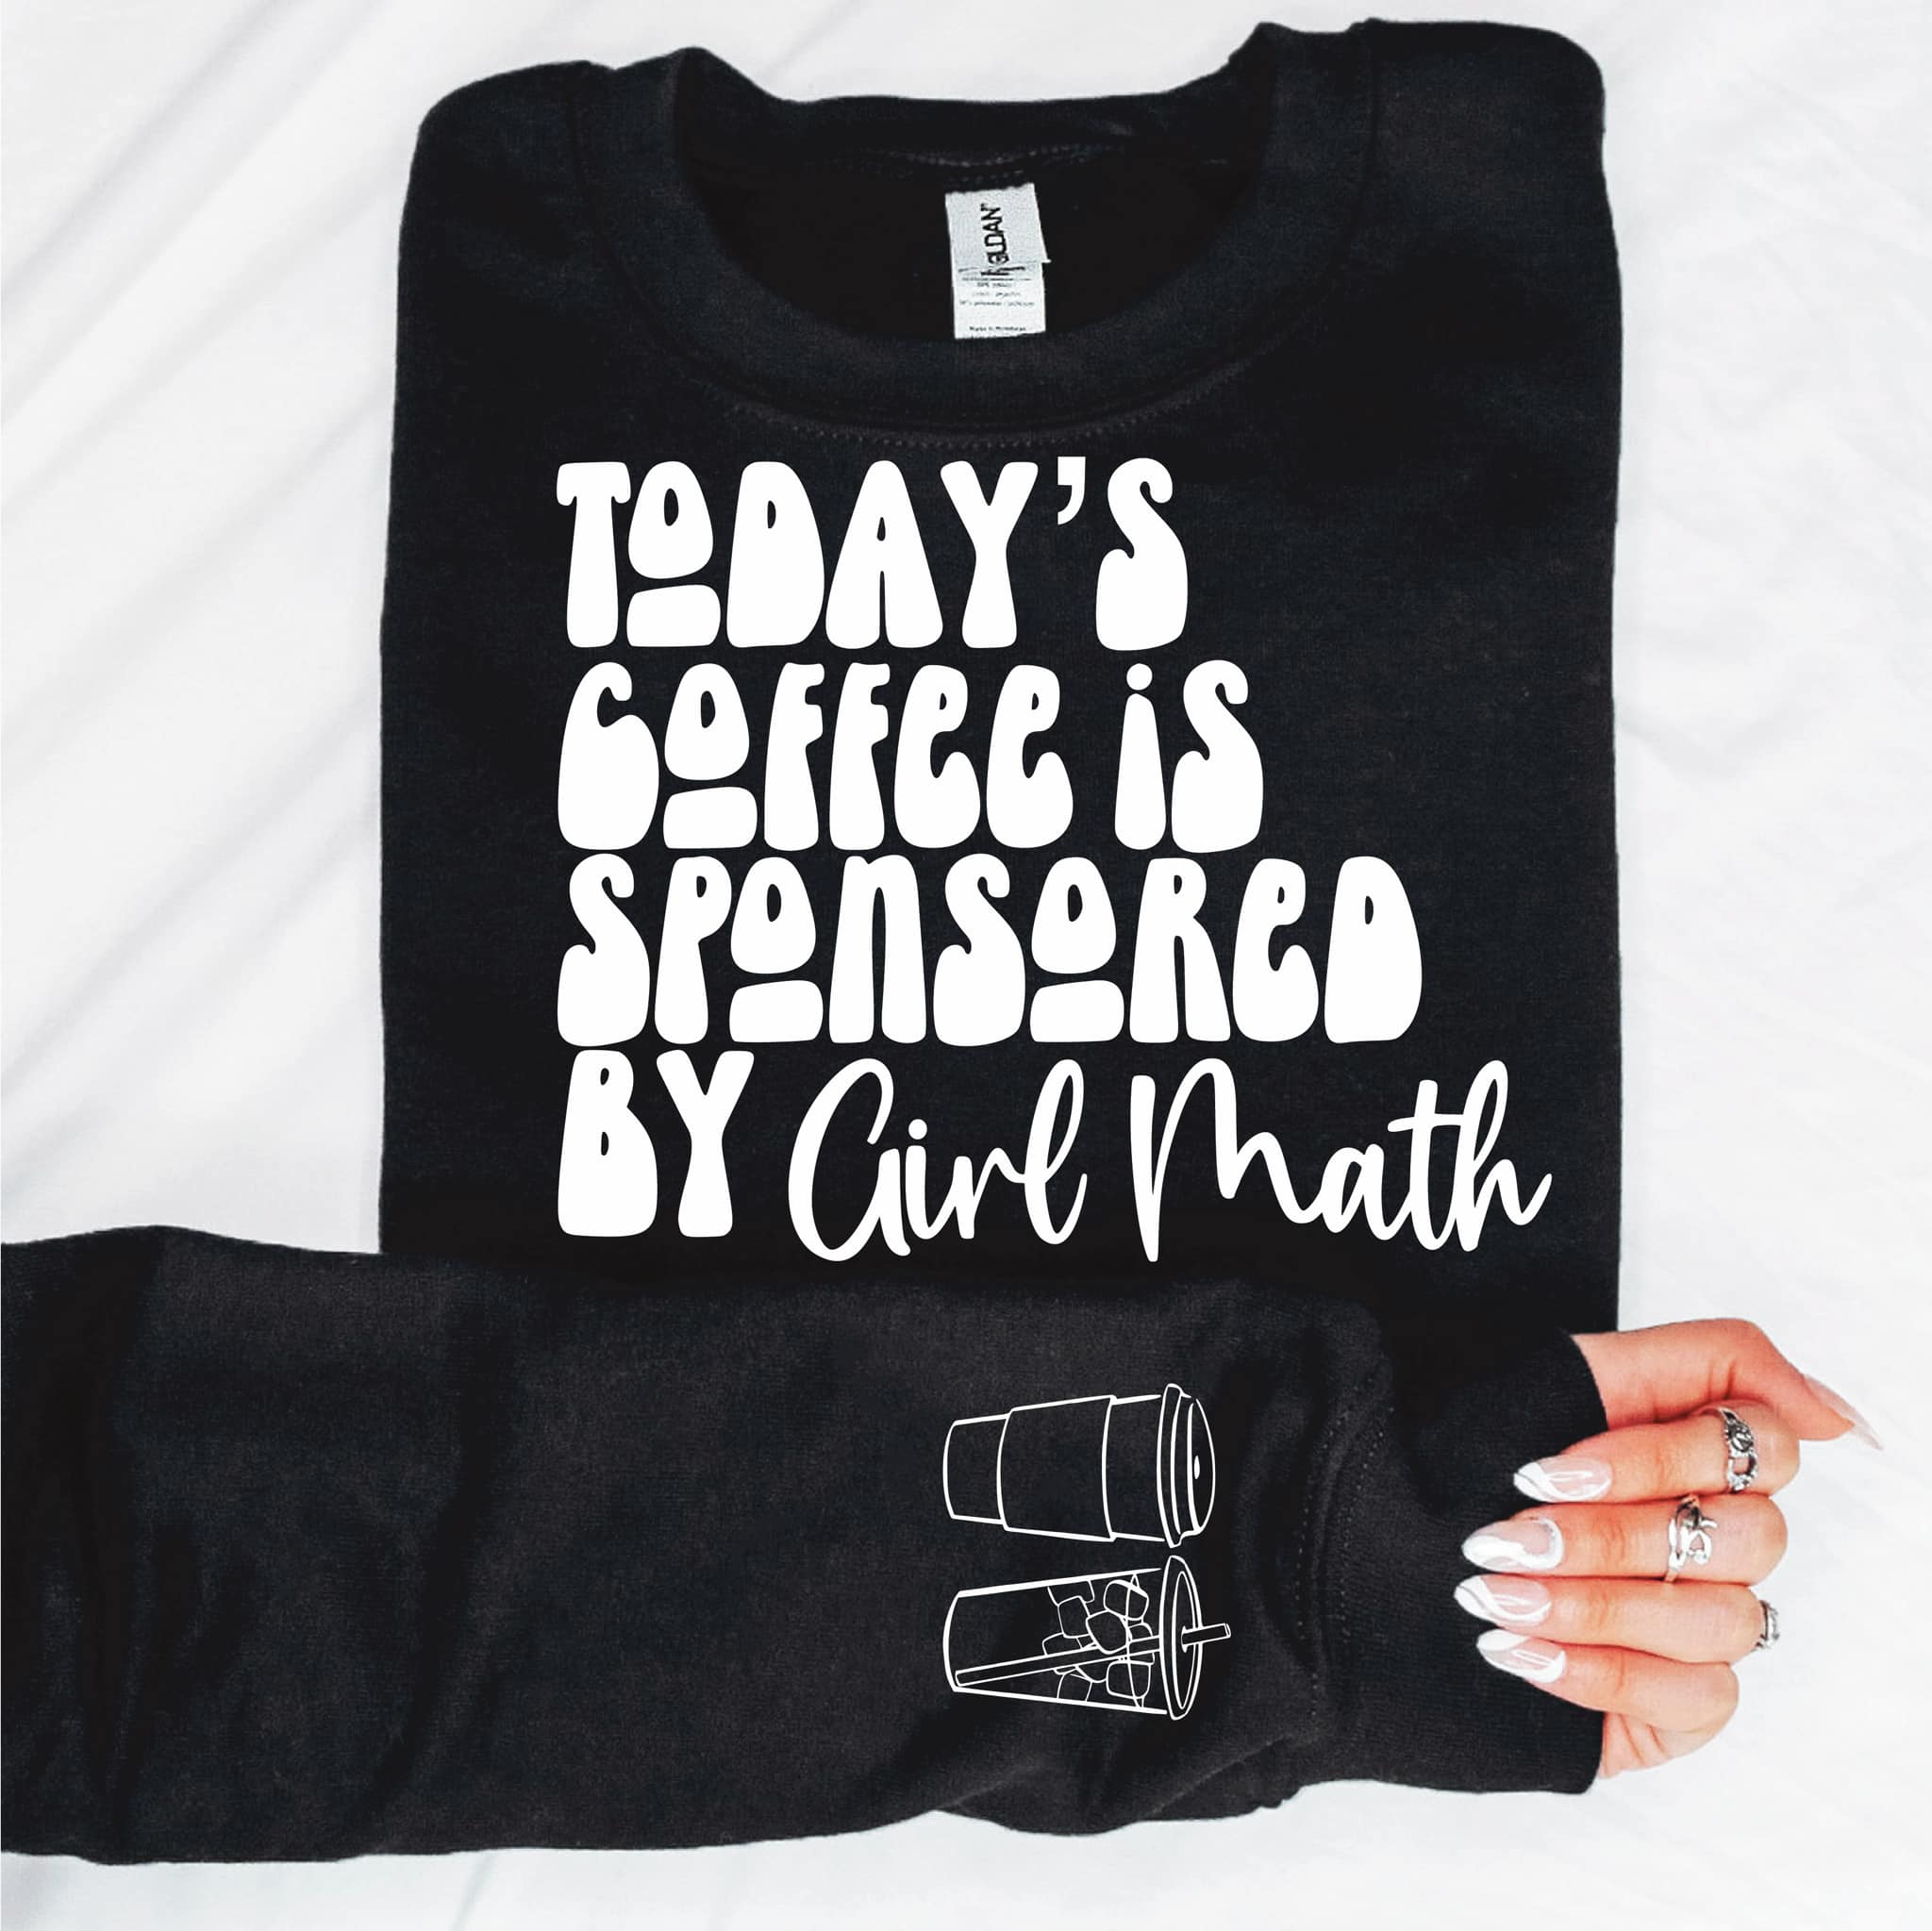 Todays Coffee Is Sponsored By Girl Math With Sleeve Accent Graphic Tee/Sweatshirt options